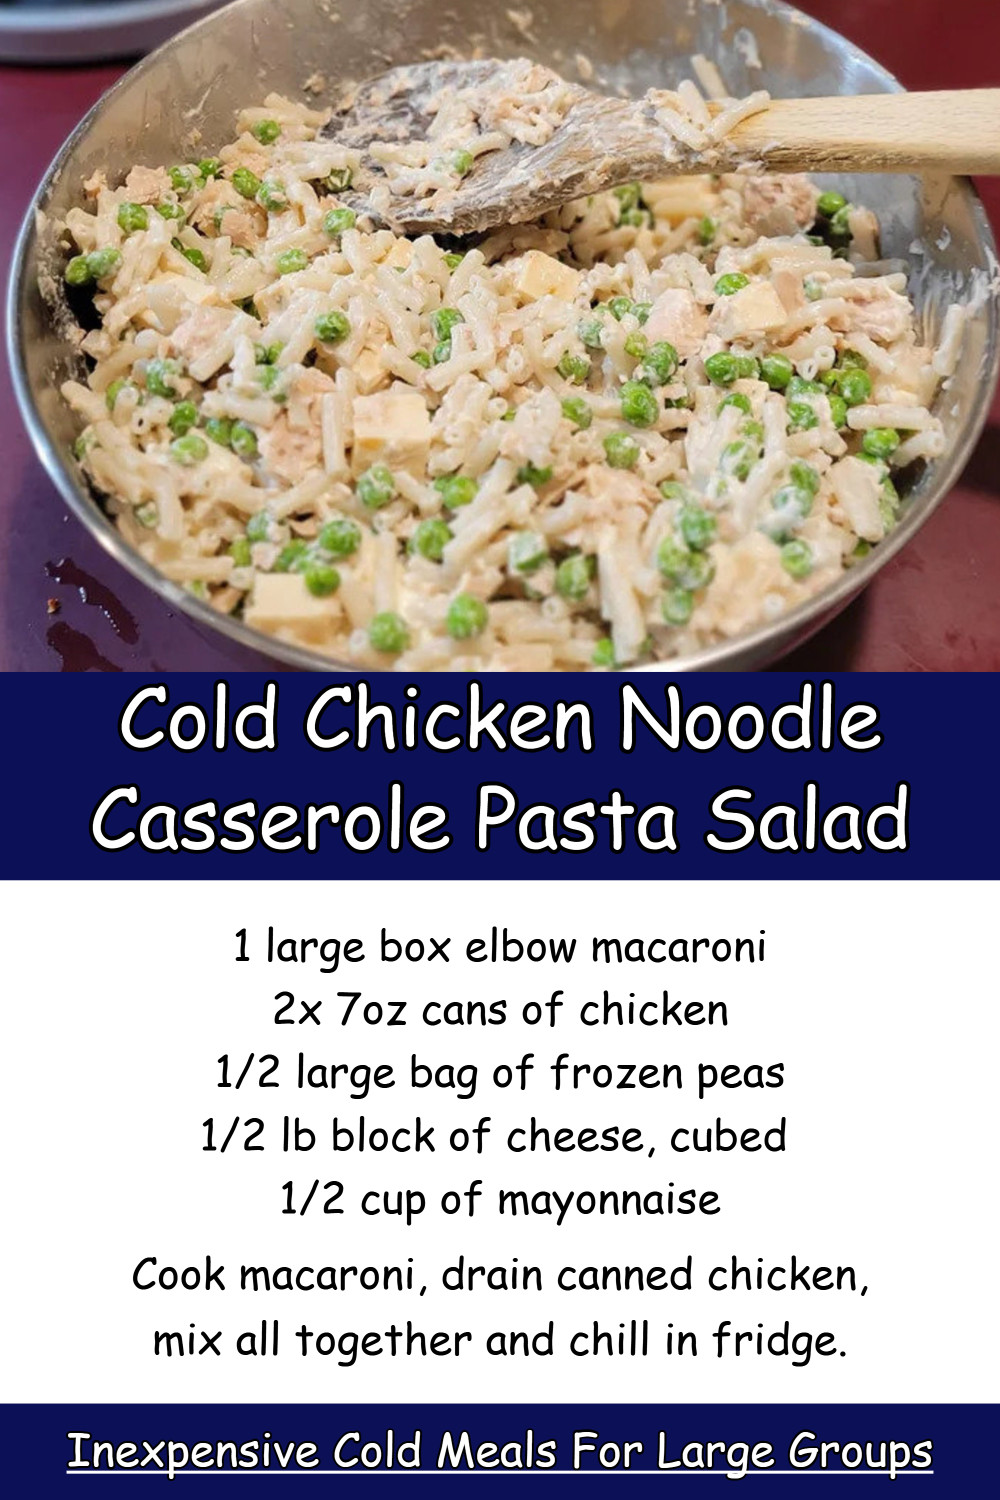 Cold Chicken Noodle Casserole Pasta Salad Main Dish for a Crowd